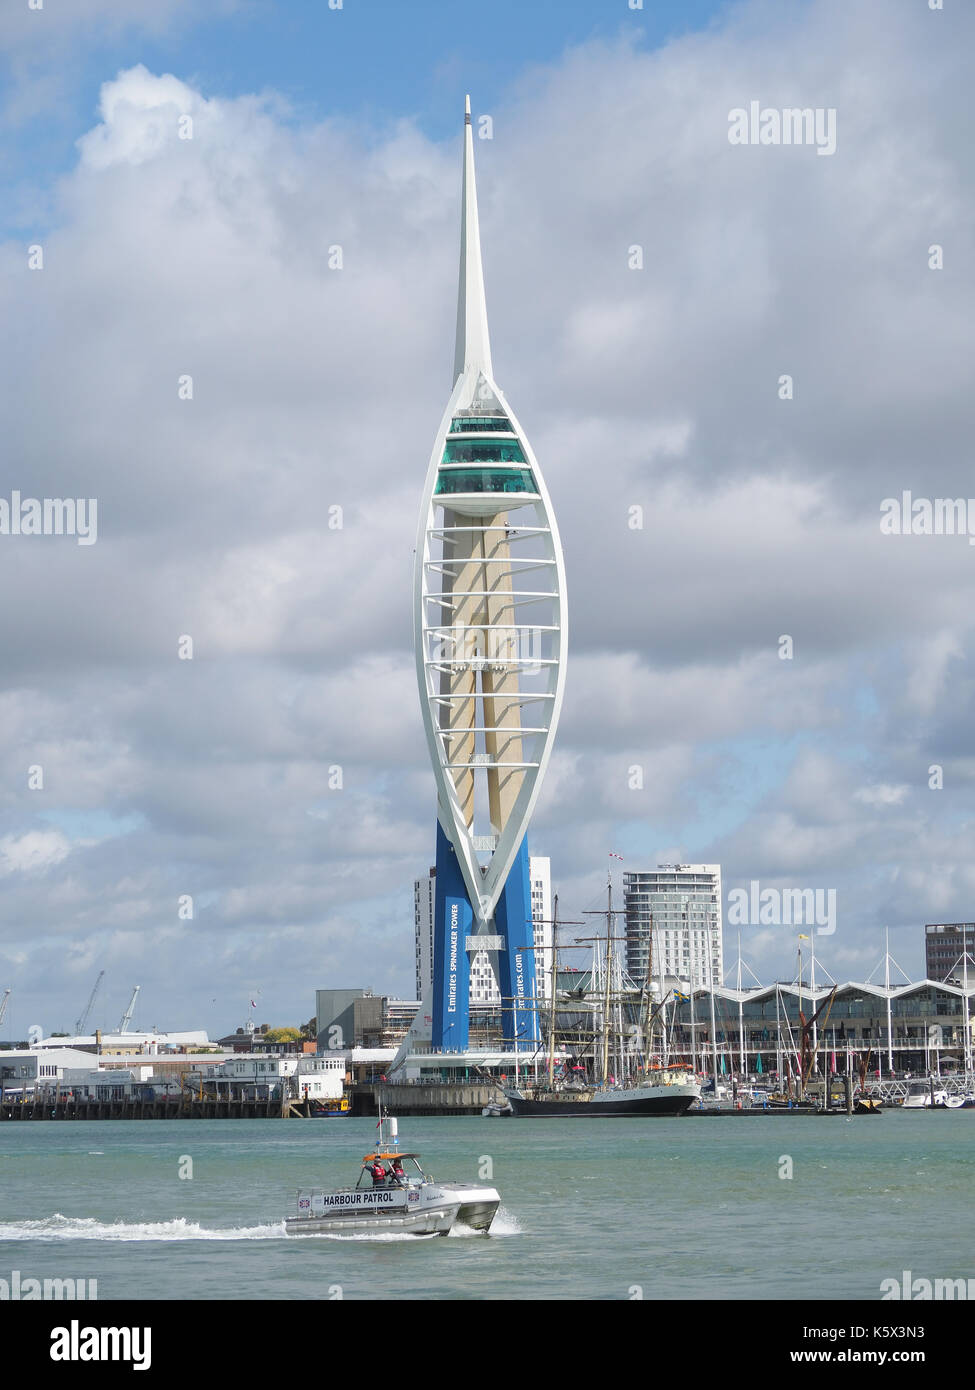 View of the Emirates Spinnaker Tower in Portsmouth Harbour UK on a cloudy summer day Stock Photo